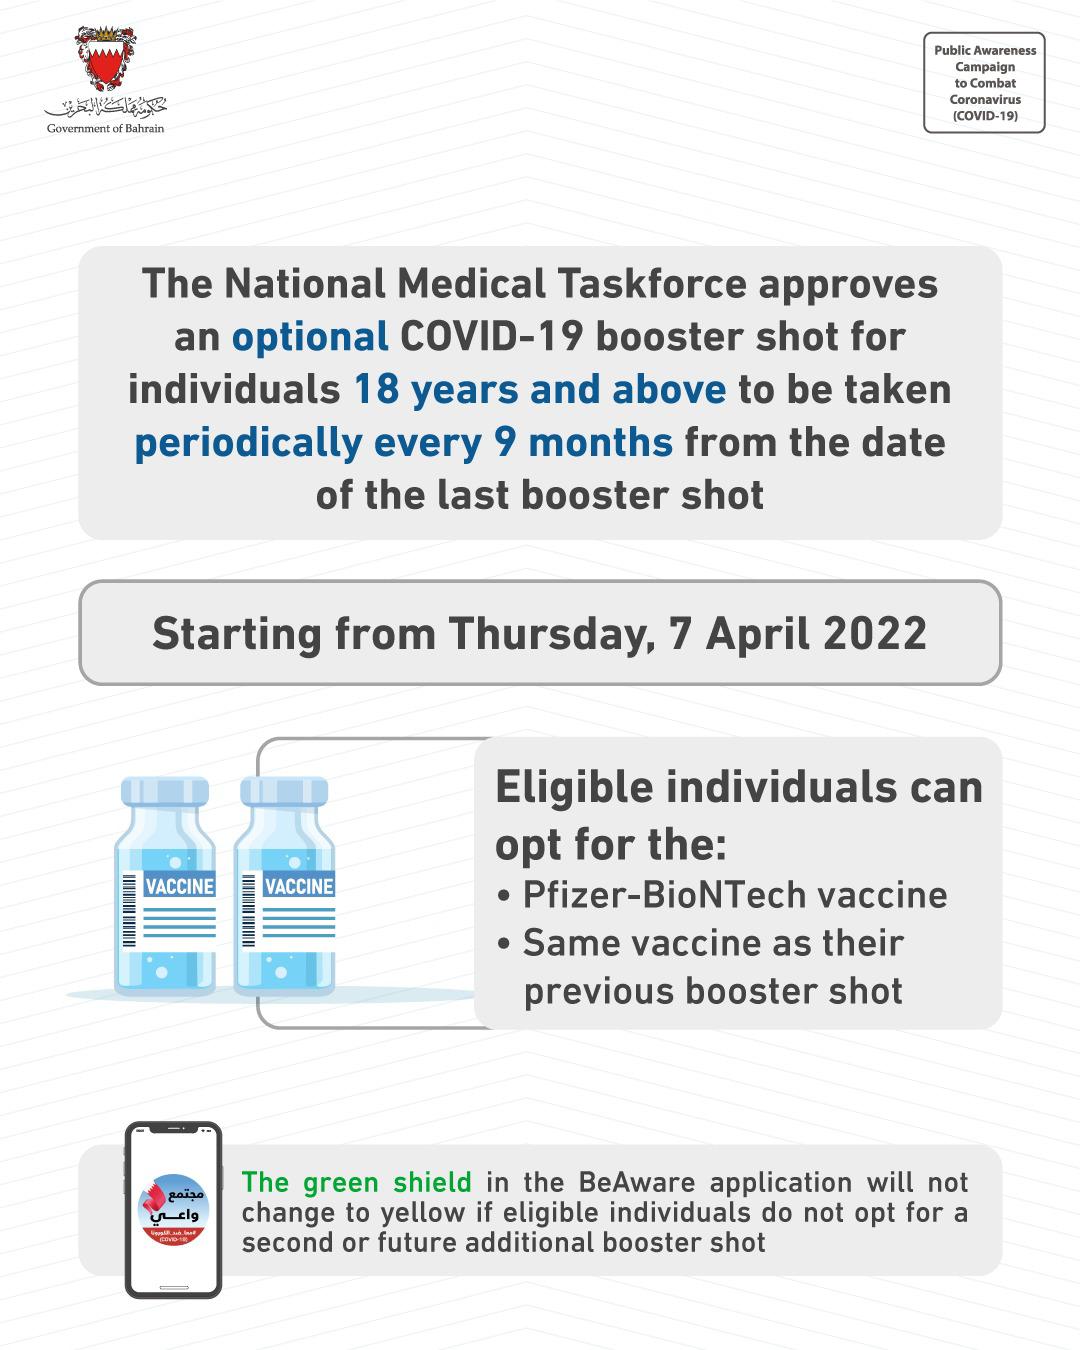 The National Medical Taskforce approves optional second COVID-19 booster shot